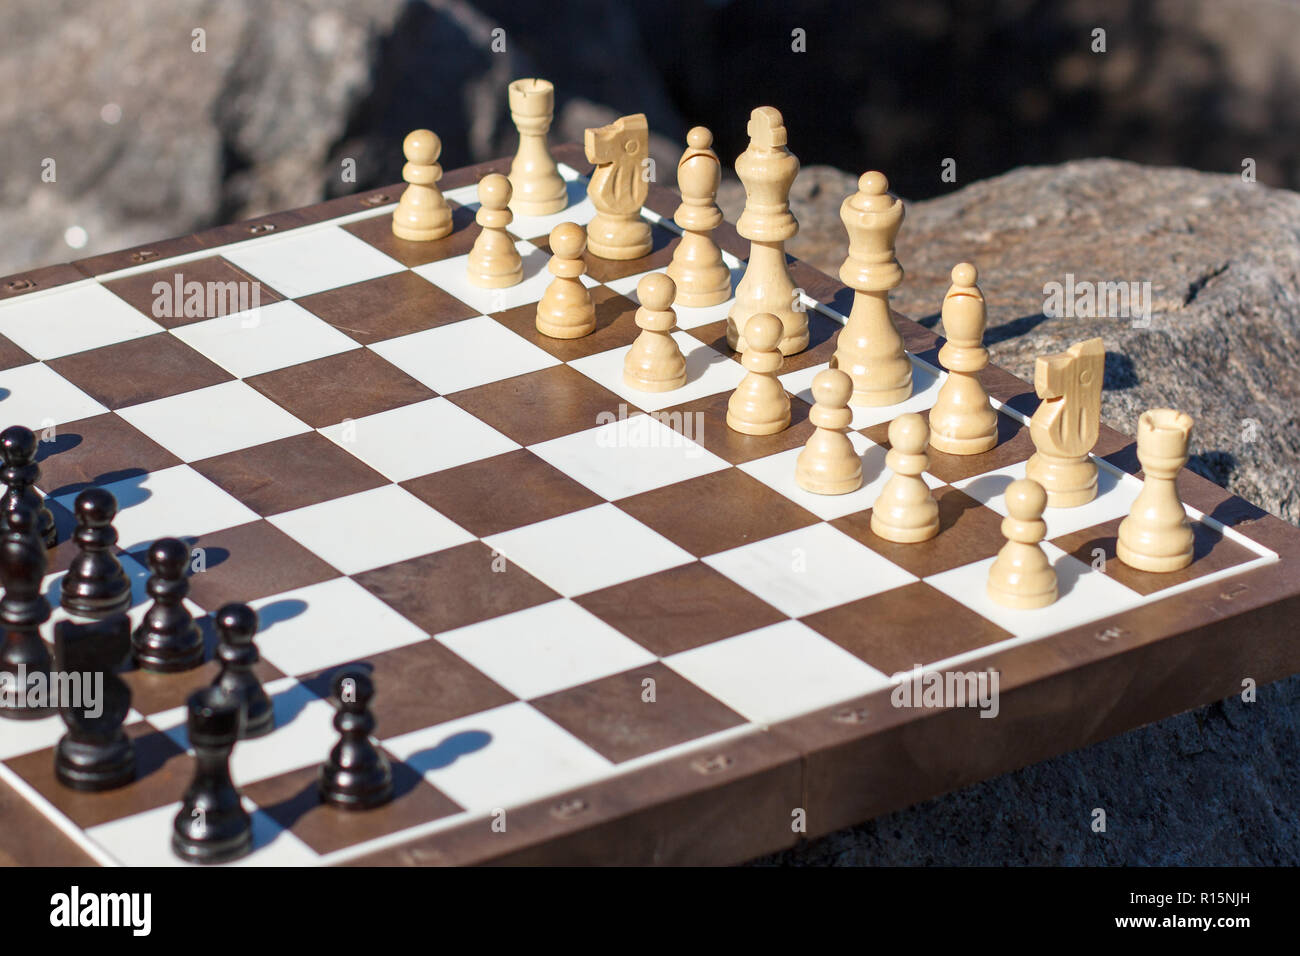 Games - PT Chess